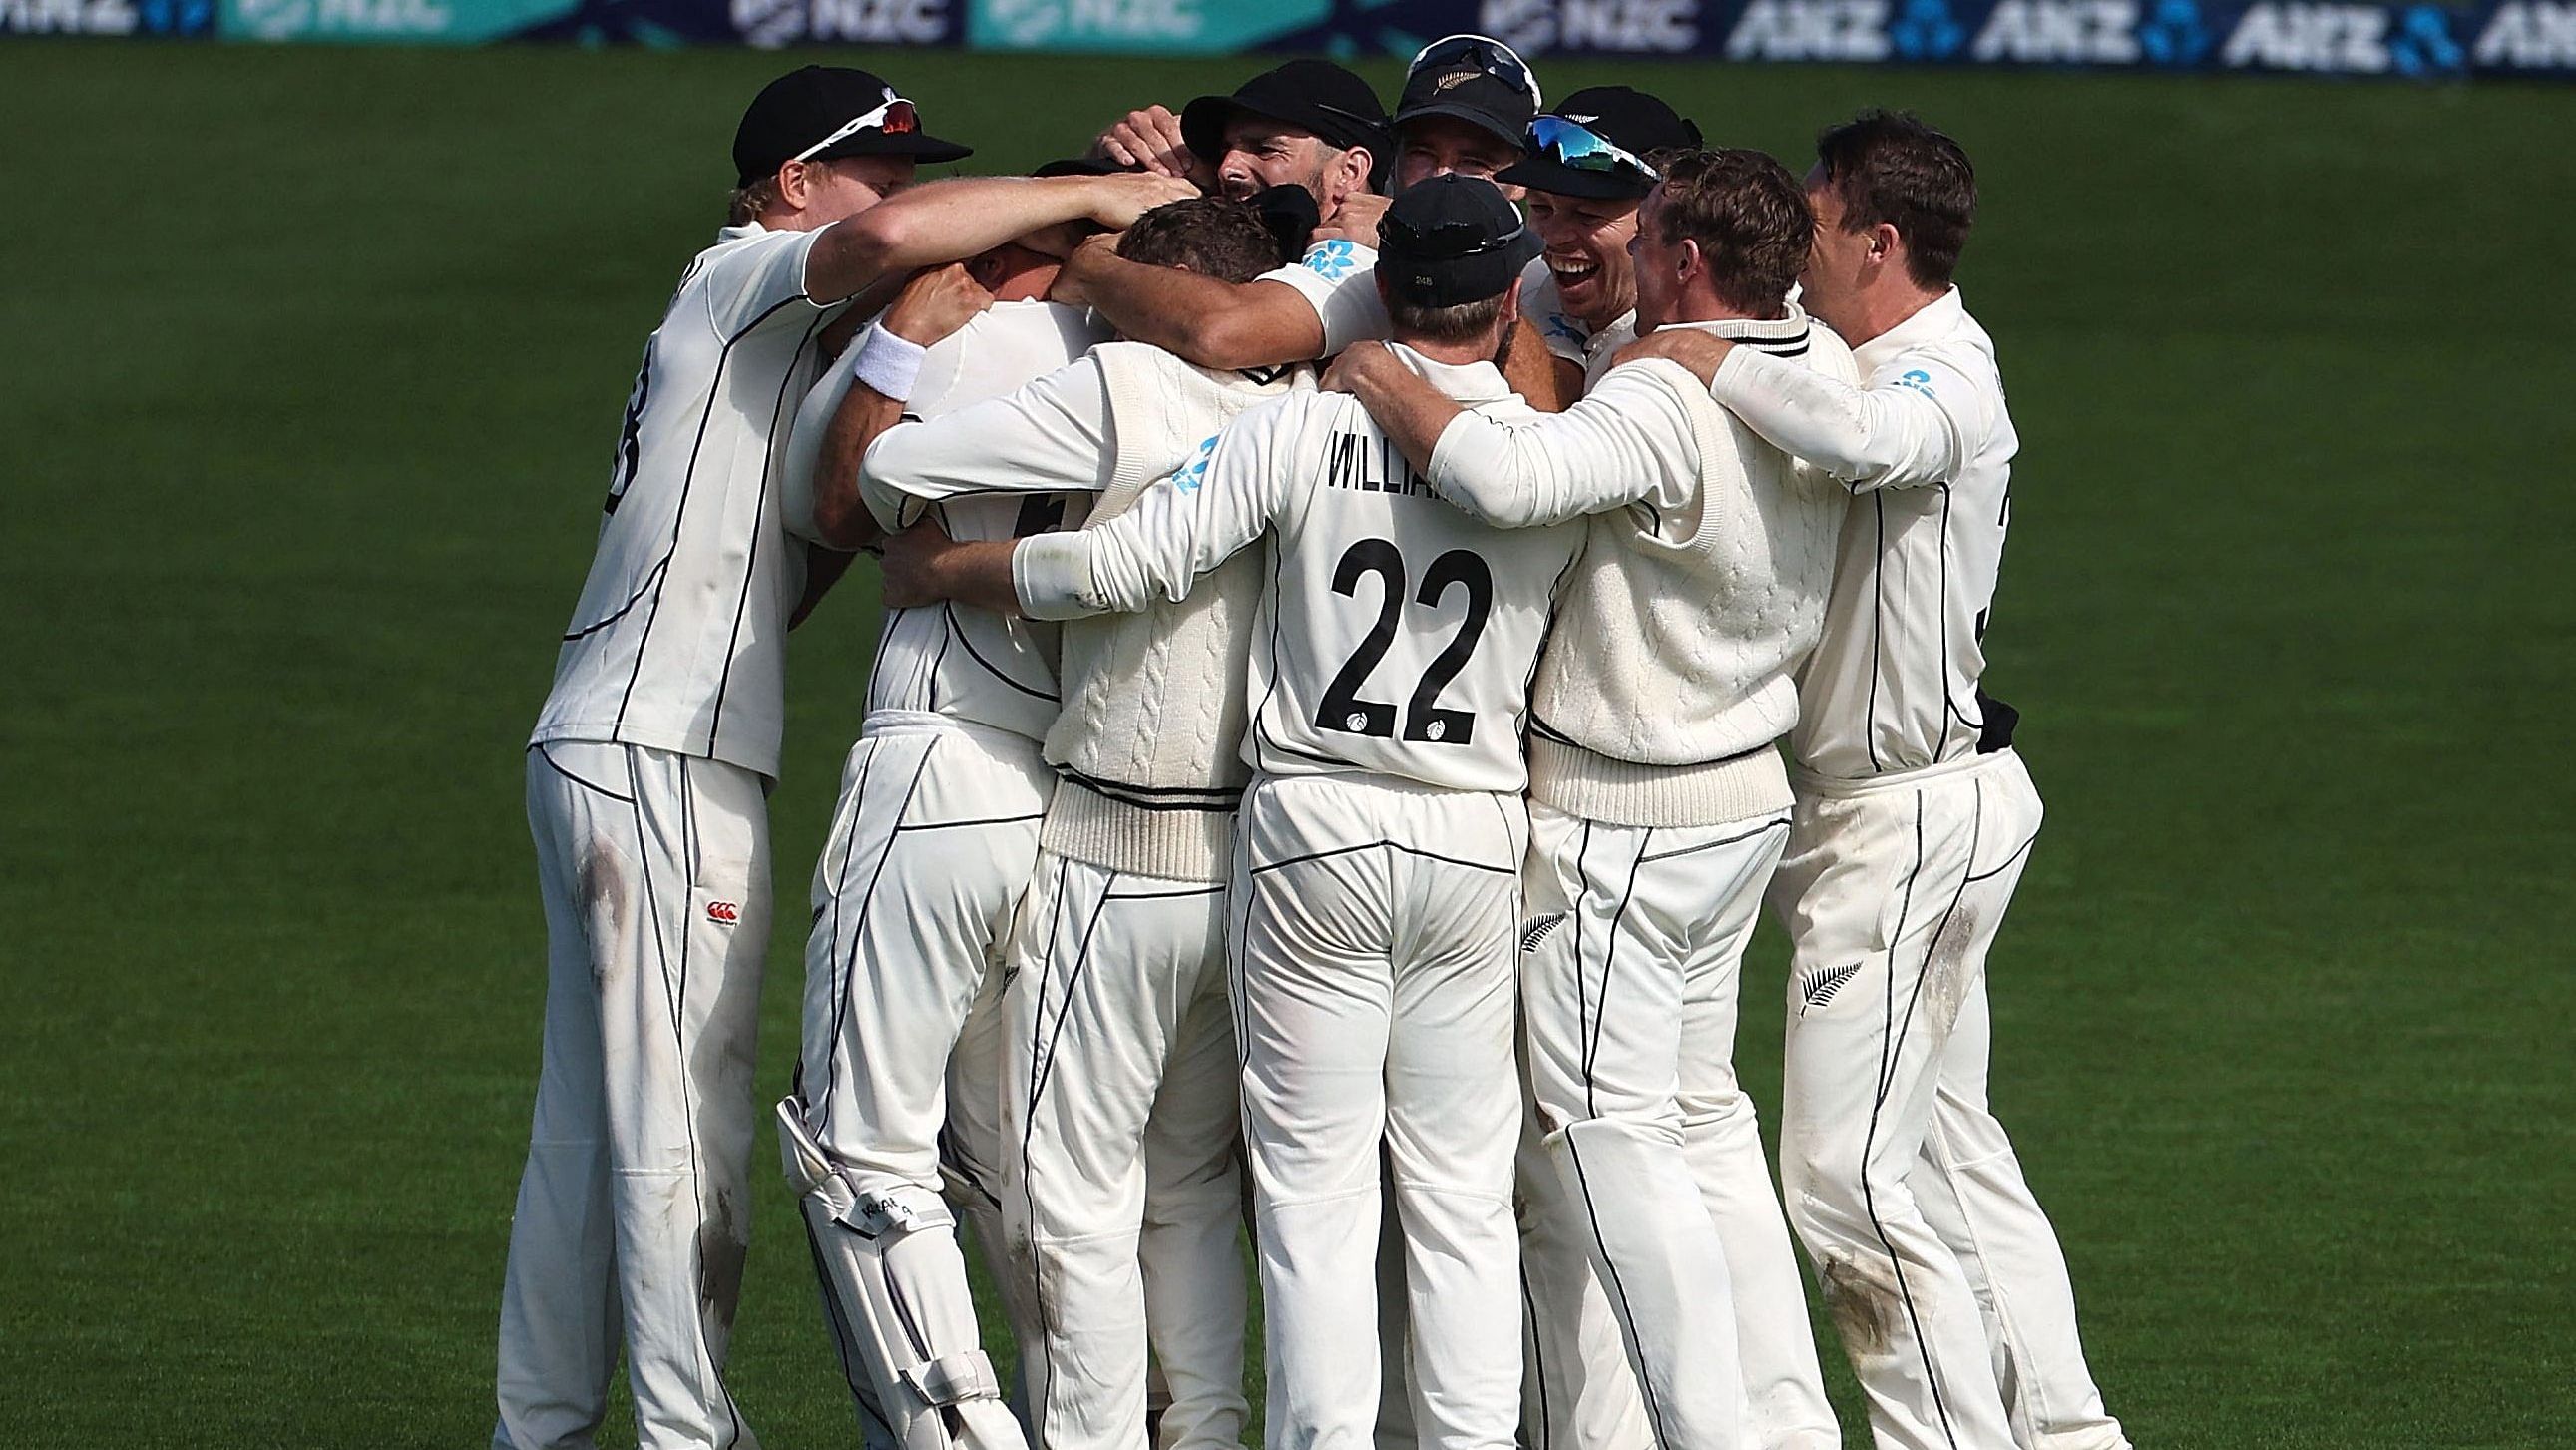 New Zealand's players celebrate their win during day five of the second cricket test match between New Zealand and England at the Basin Reserve in Wellington. Credit: AFP Photo